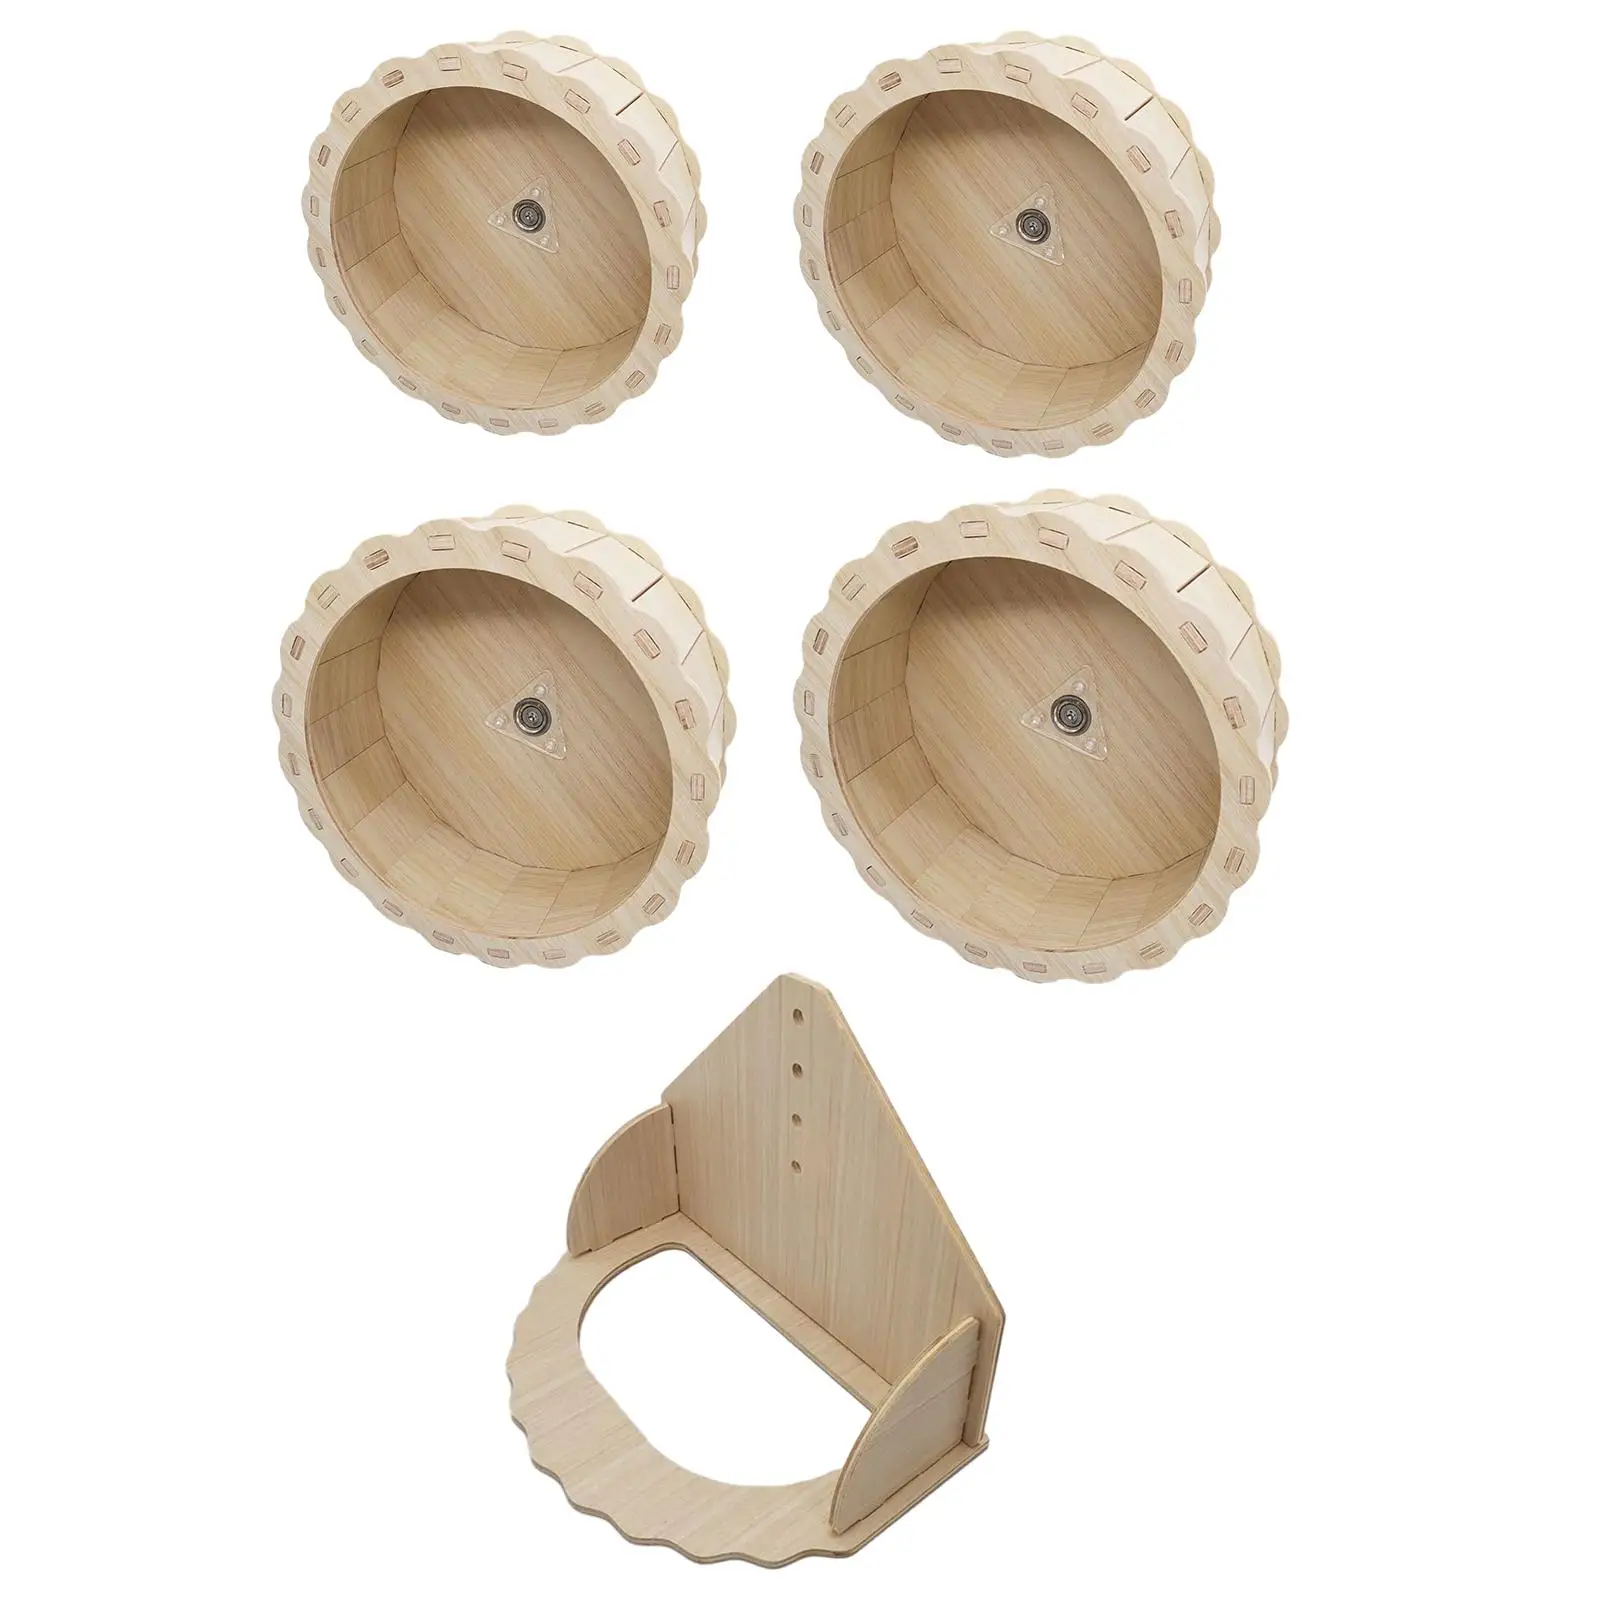 Hamster Wooden Running Wheel Fitness Toys Exercise Wheel Hamster Treadmill Quiet Pet Supplies for Mice Chinchilla Hedgehog